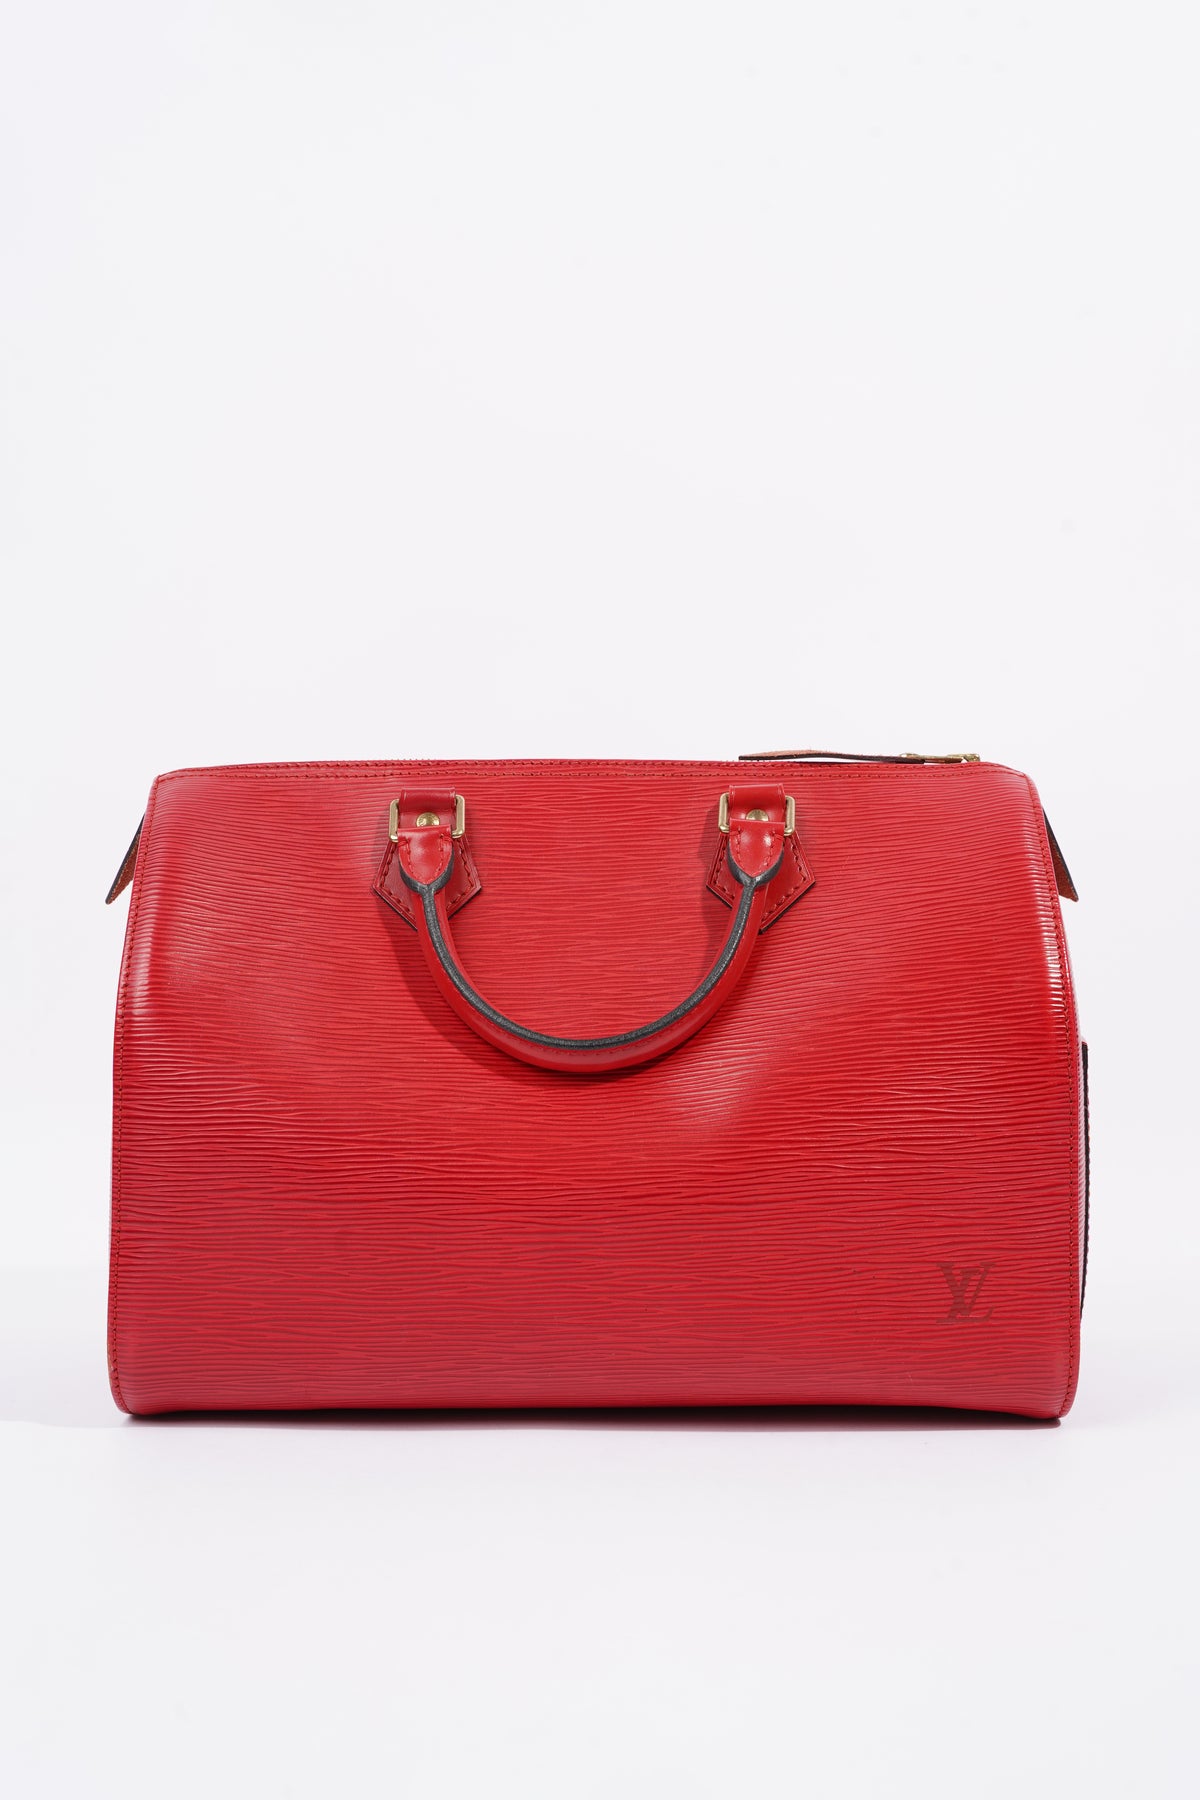 Louis Vuitton Womens Vintage Speedy 30 Bag Red Epi Leather – Luxe Collective